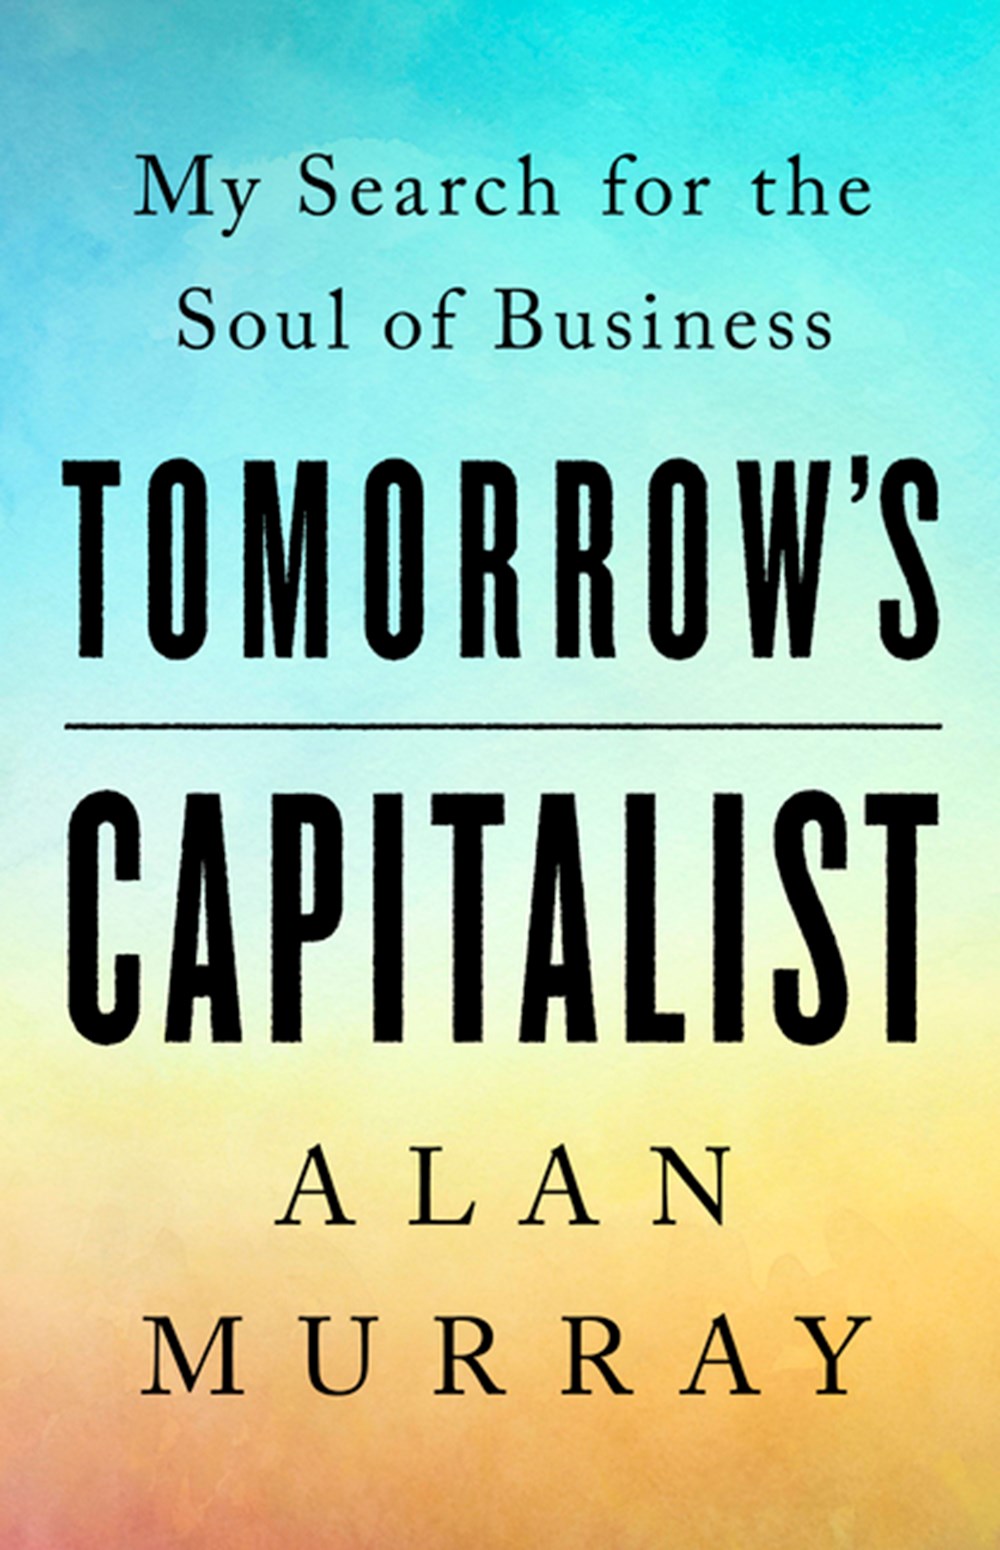 Tomorrow's Capitalist My Search for the Soul of Business